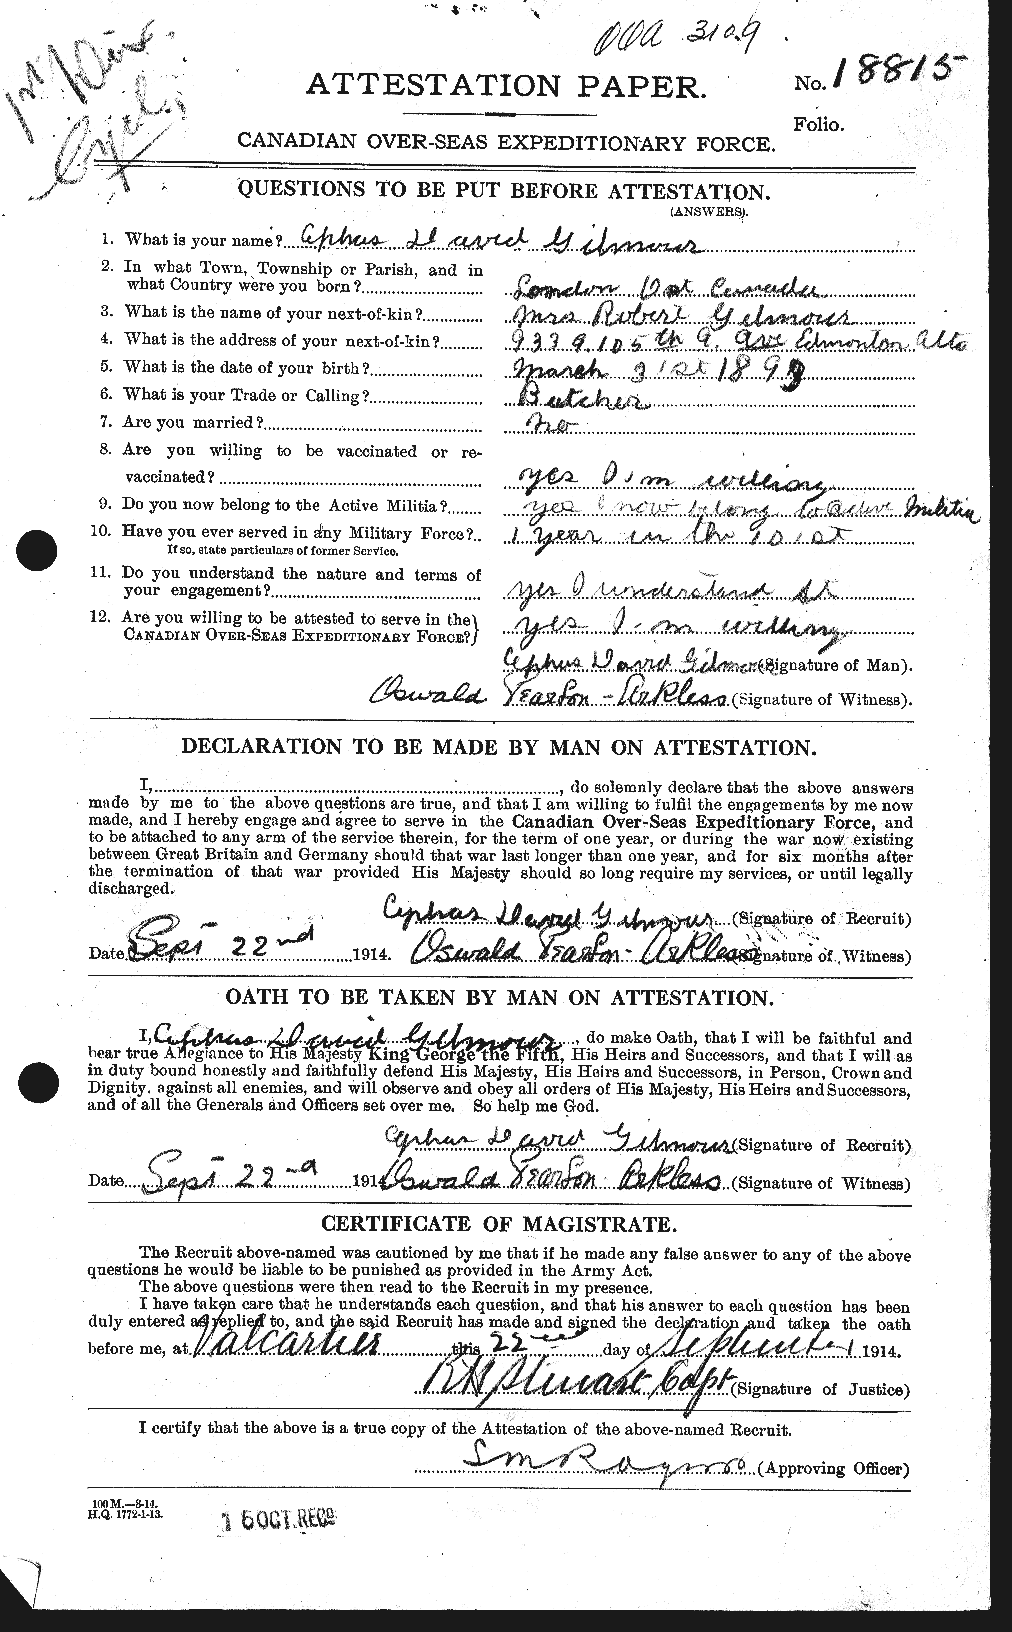 Personnel Records of the First World War - CEF 350928a